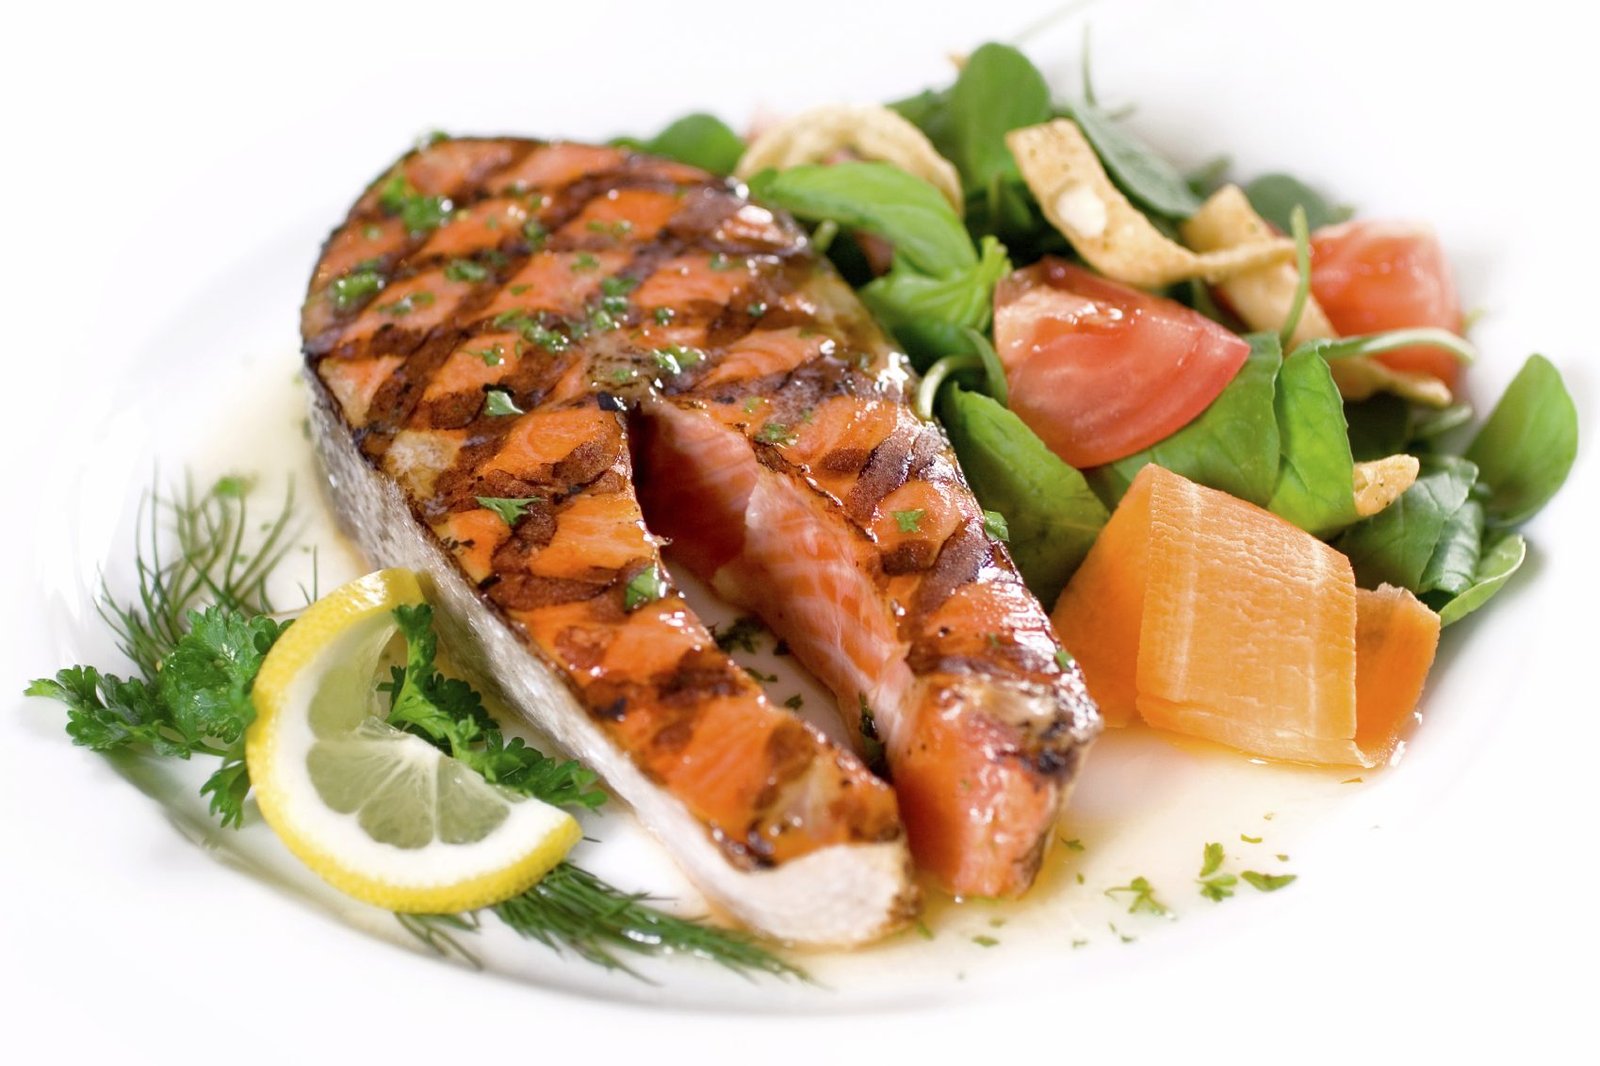 Delicious salmon steak grilled to perfect and served with a colorful side salad of wild greens.  Shallow dof.